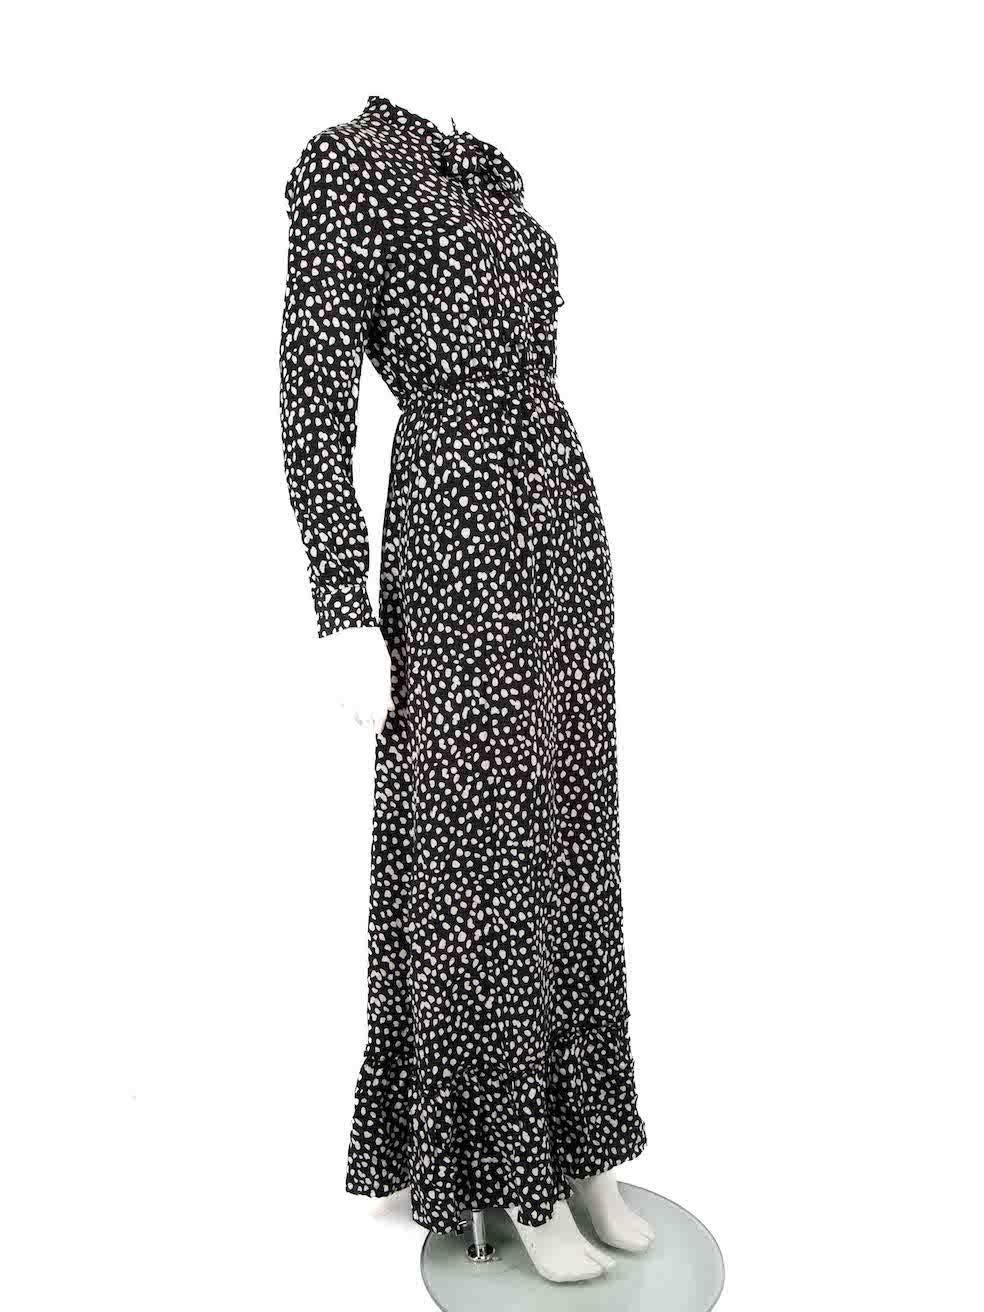 CONDITION is Very good. Hardly any visible wear to dress is evident on this used Anine Bing designer resale item.
 
 
 
 Details
 
 
 Black
 
 Silk
 
 Dress
 
 Maxi
 
 Dotted pattern
 
 Long sleeves
 
 Buttoned cuffs
 
 Neck tie detail
 
